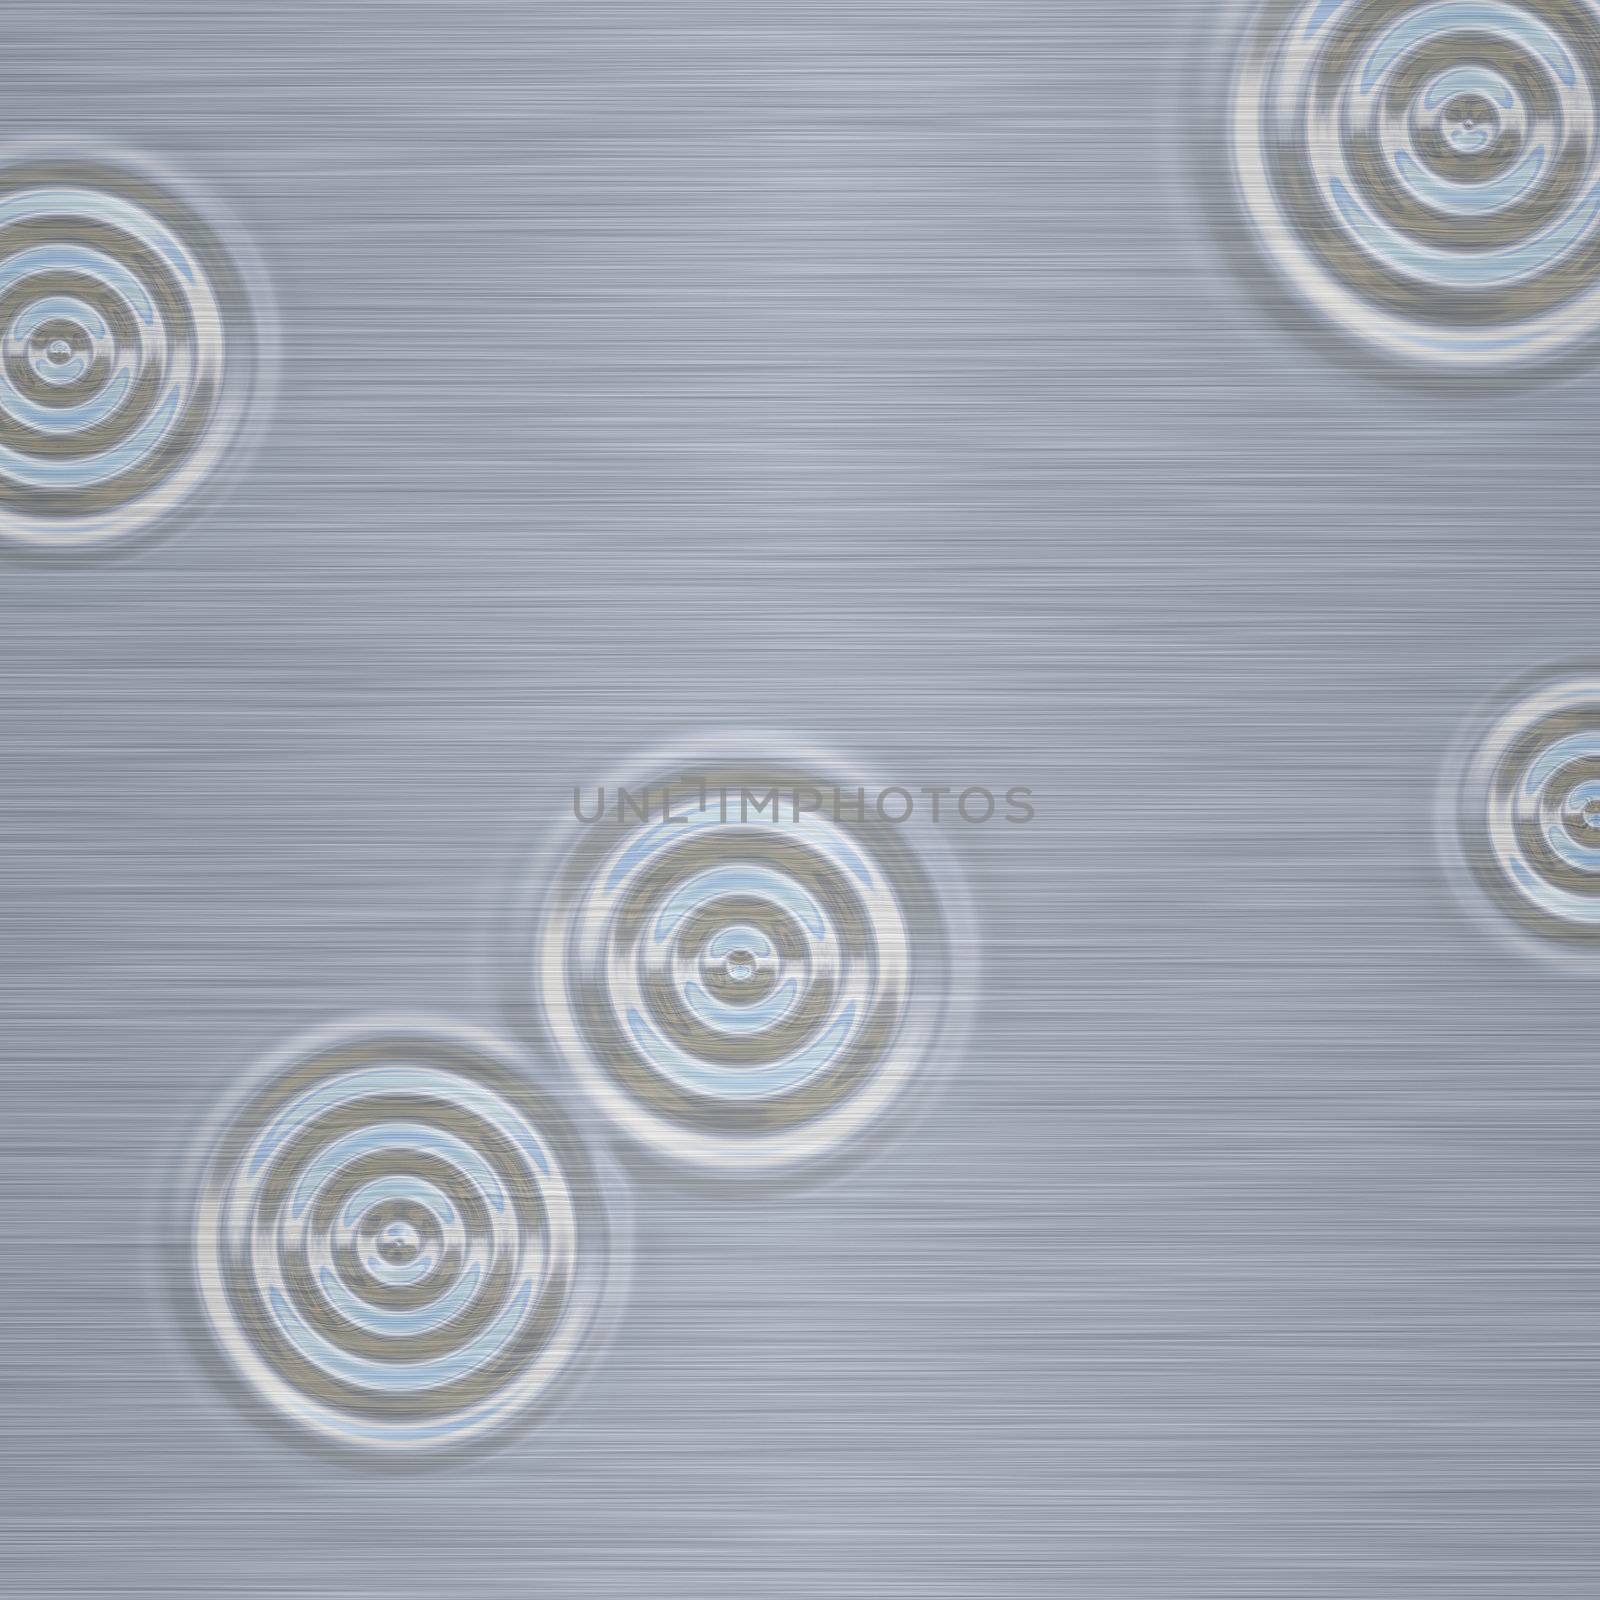 drops in brushed metal by clearviewstock